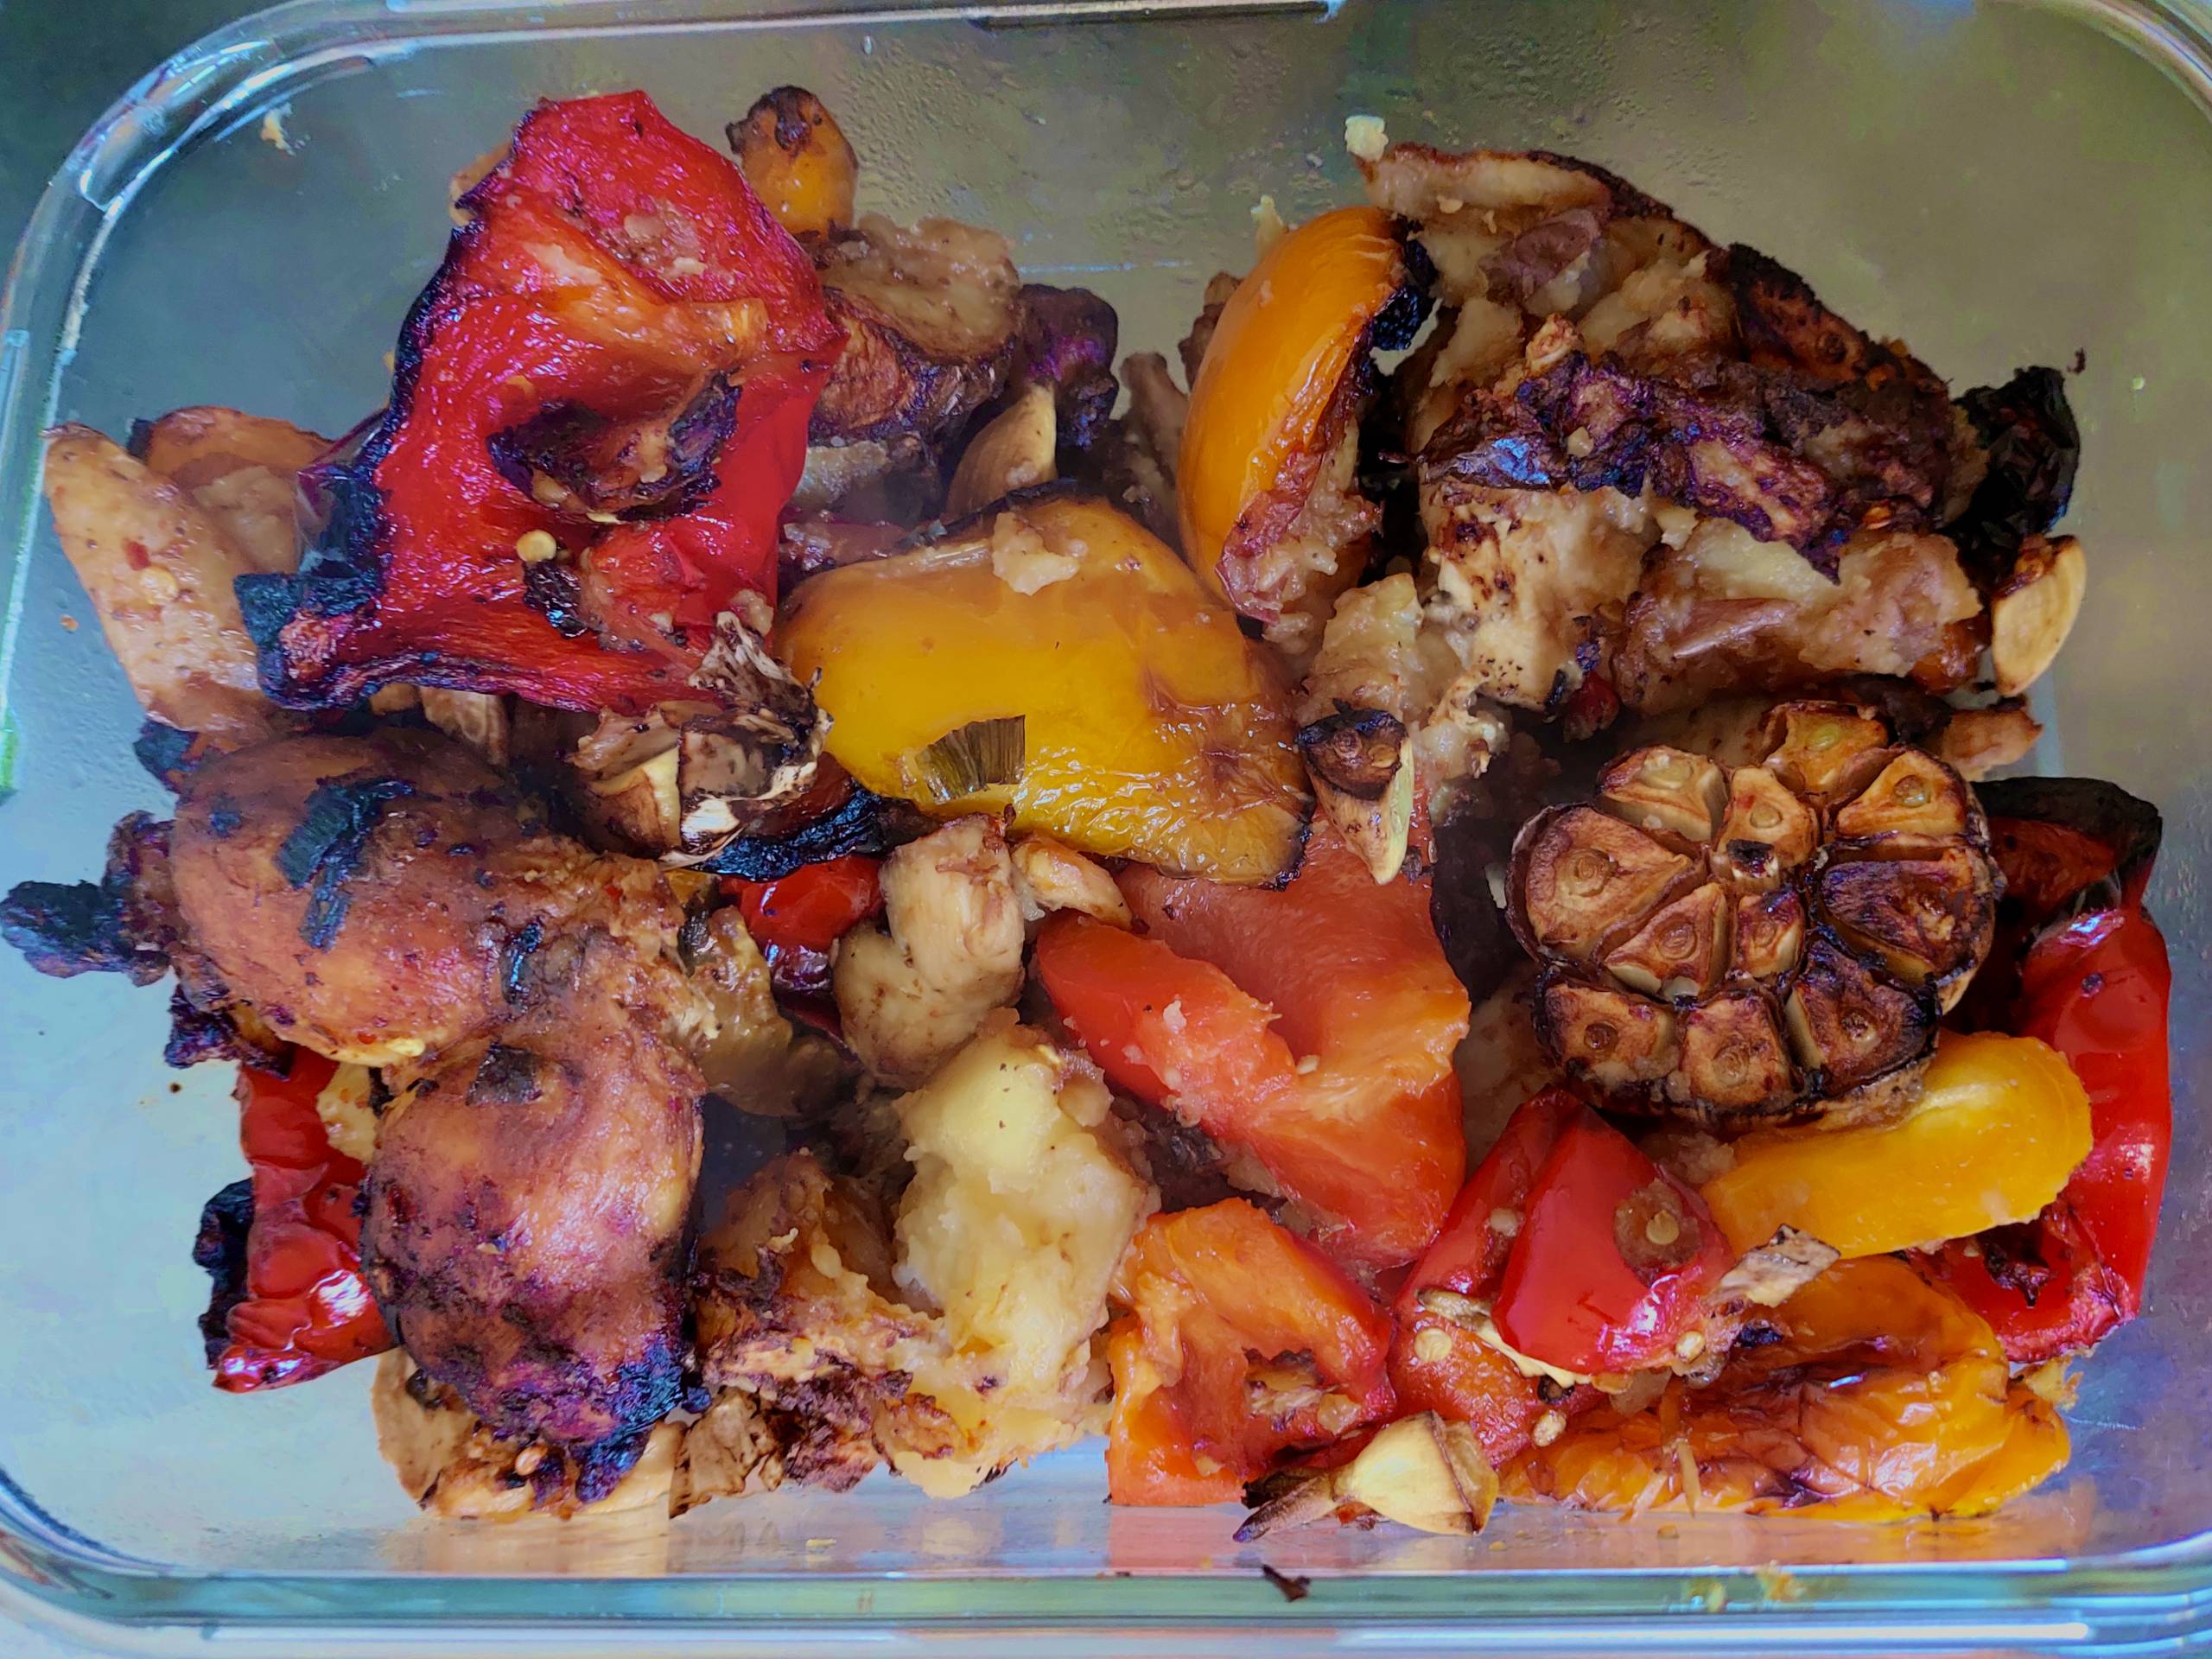 Flavorful Mixed Grill with Chicken, Peppers, Garlic, and Boiled Potatoes